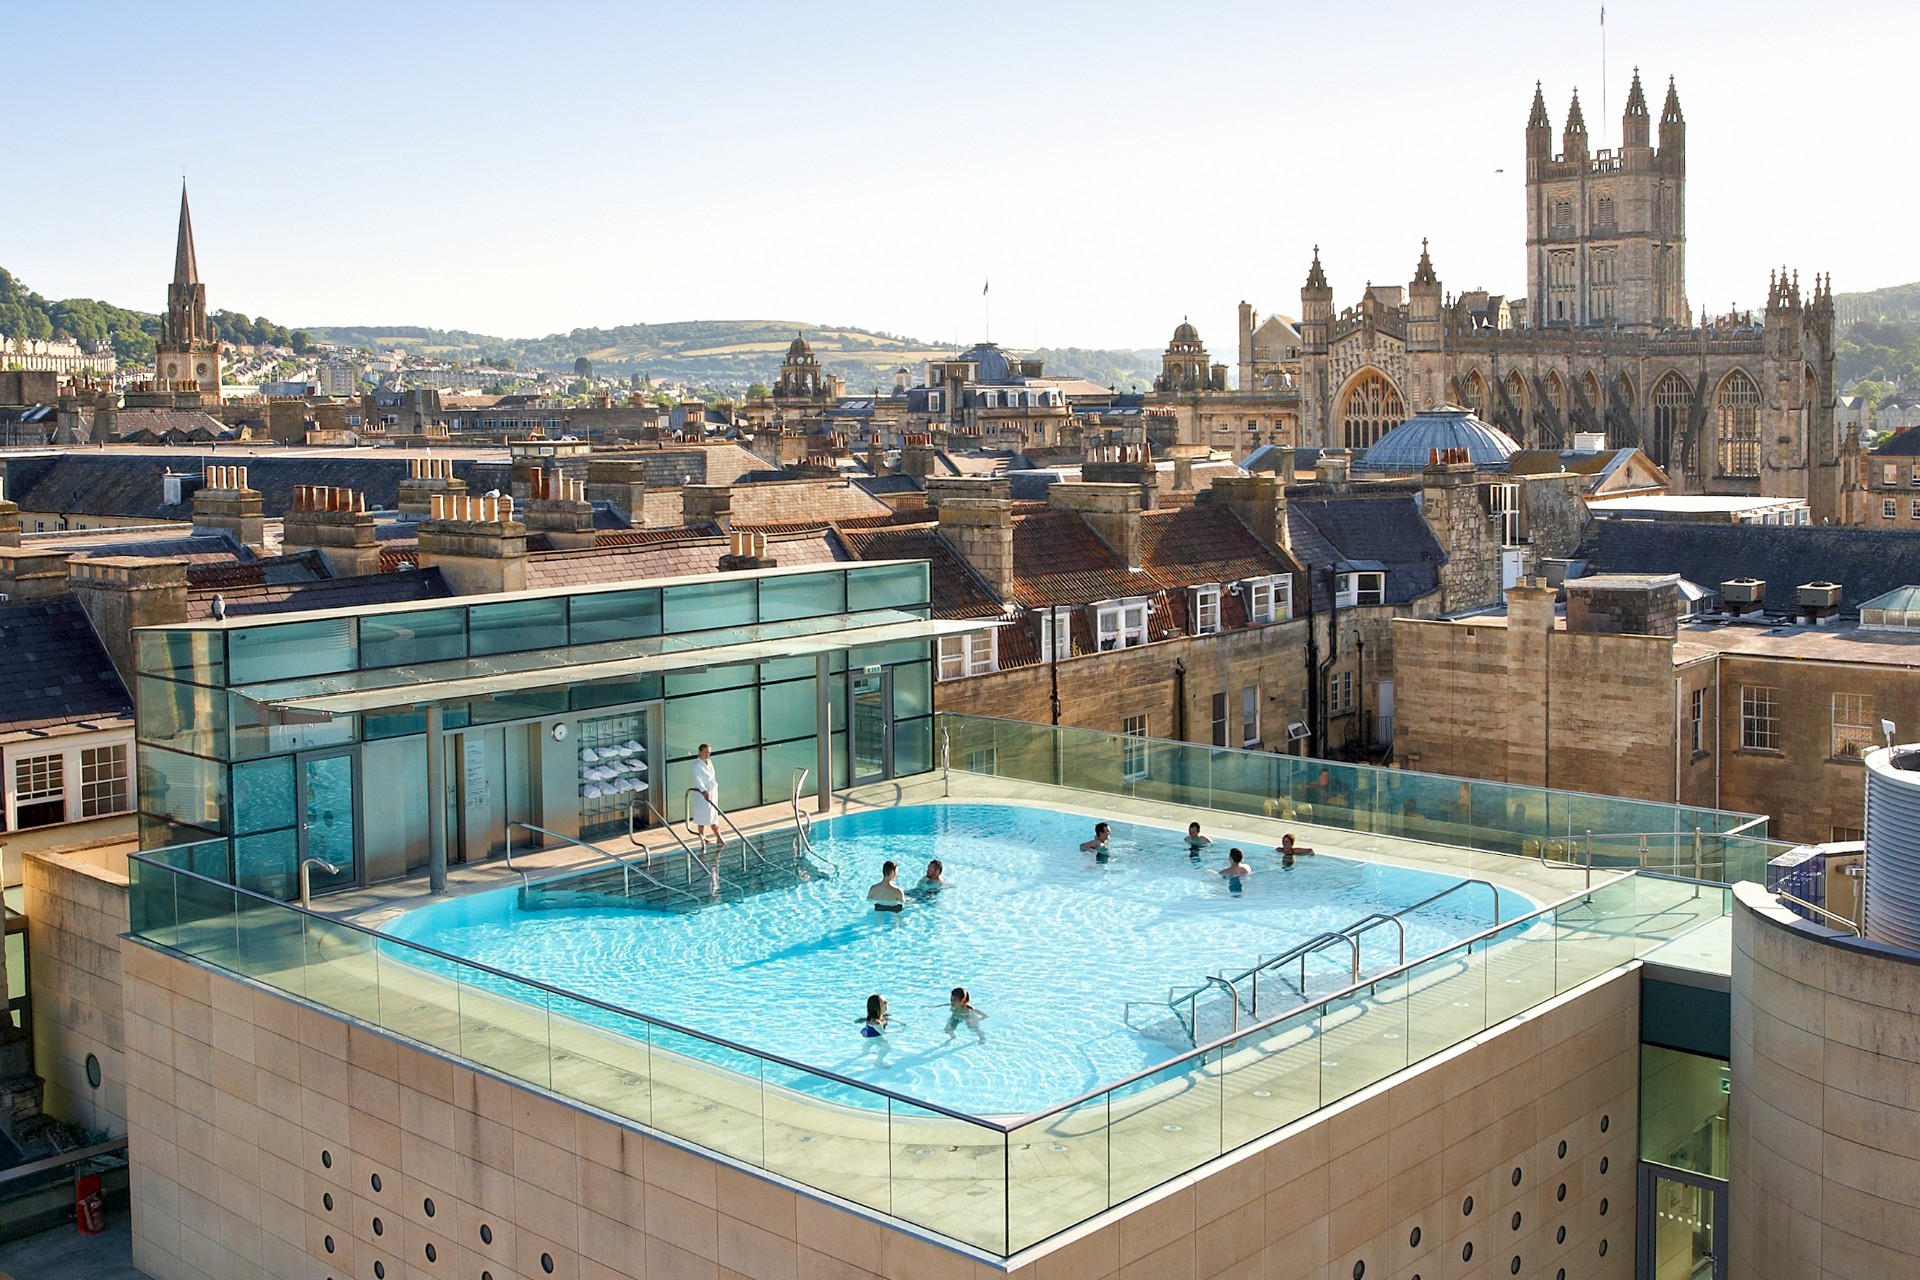 Thermae Bath Spa Heated Rooftop Pool City Views Bath Hen Do Romantic Travel Gift Ideas for Valentine's Day